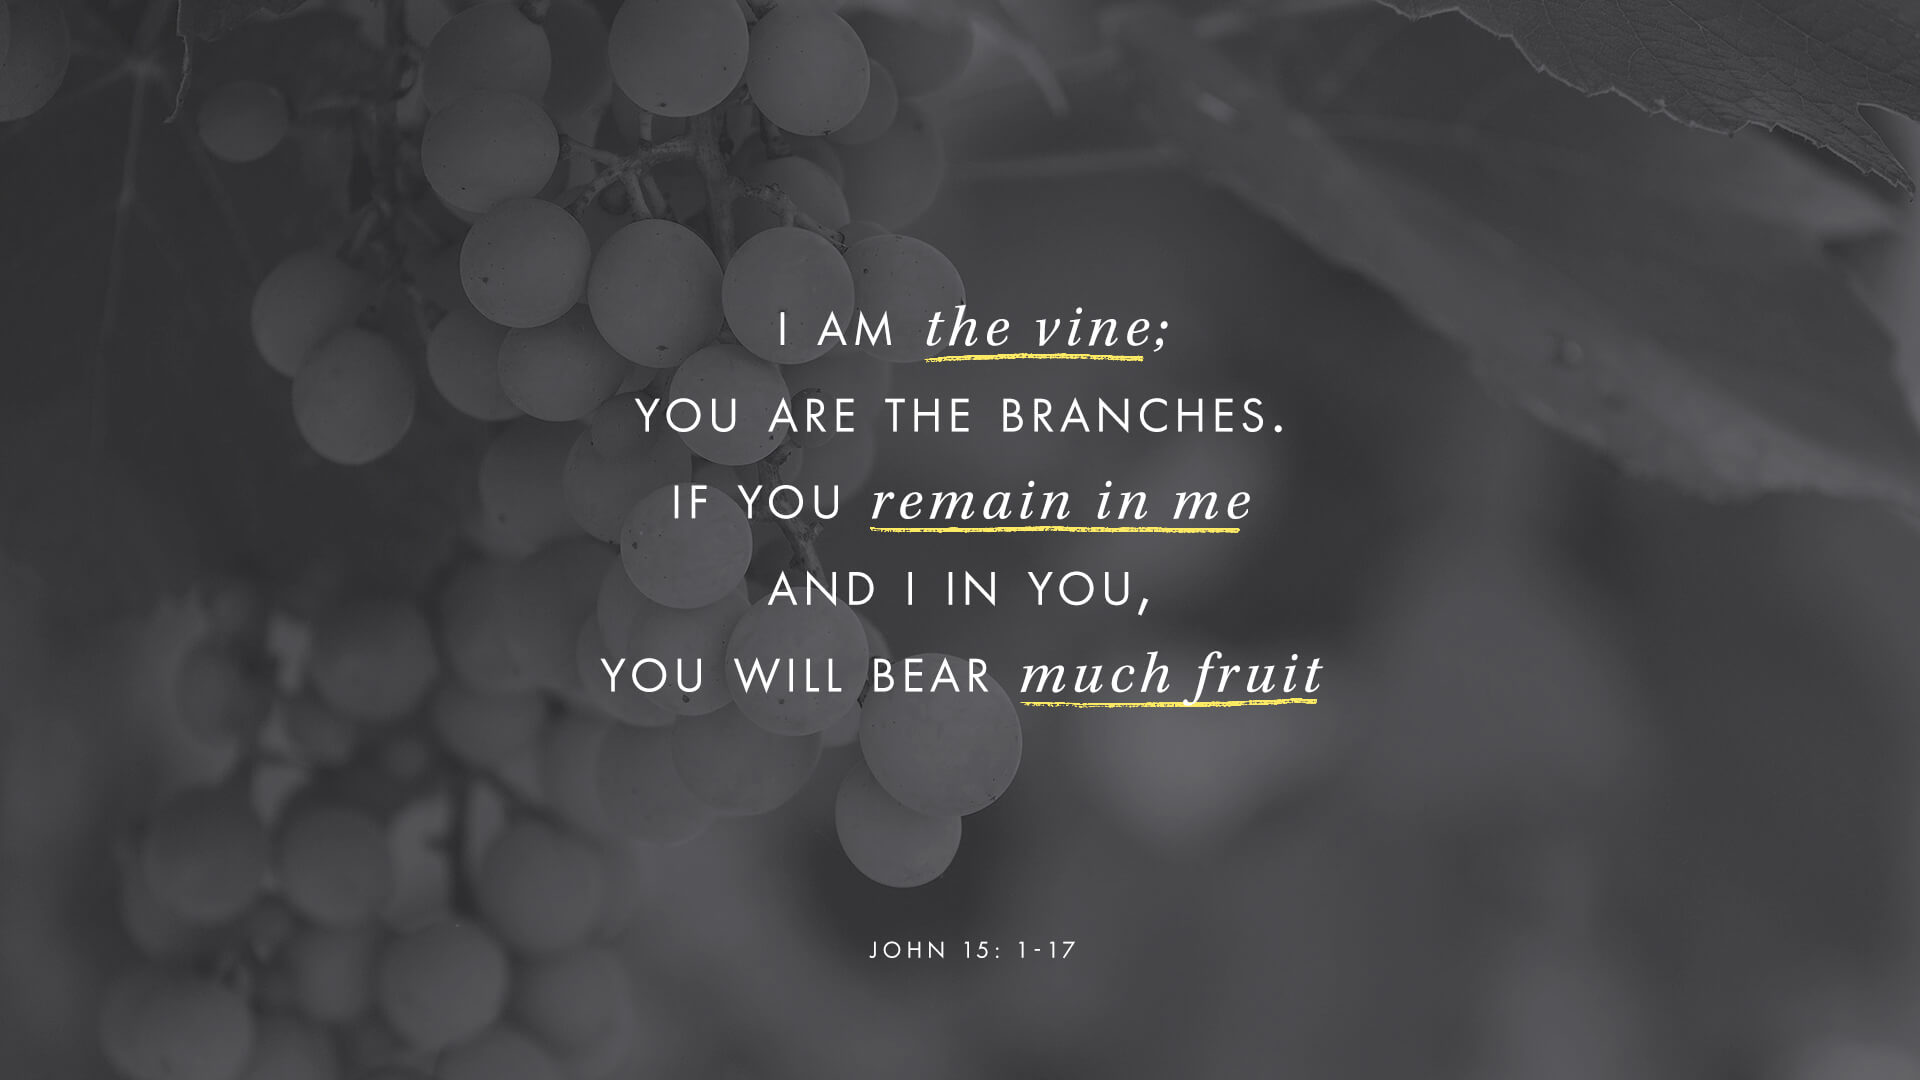 A picture of grapes with text overtop that reads "I am the vine; you are the branches. If you remaind in me and I in you, you will bear much fruit." (John 15:1-17)